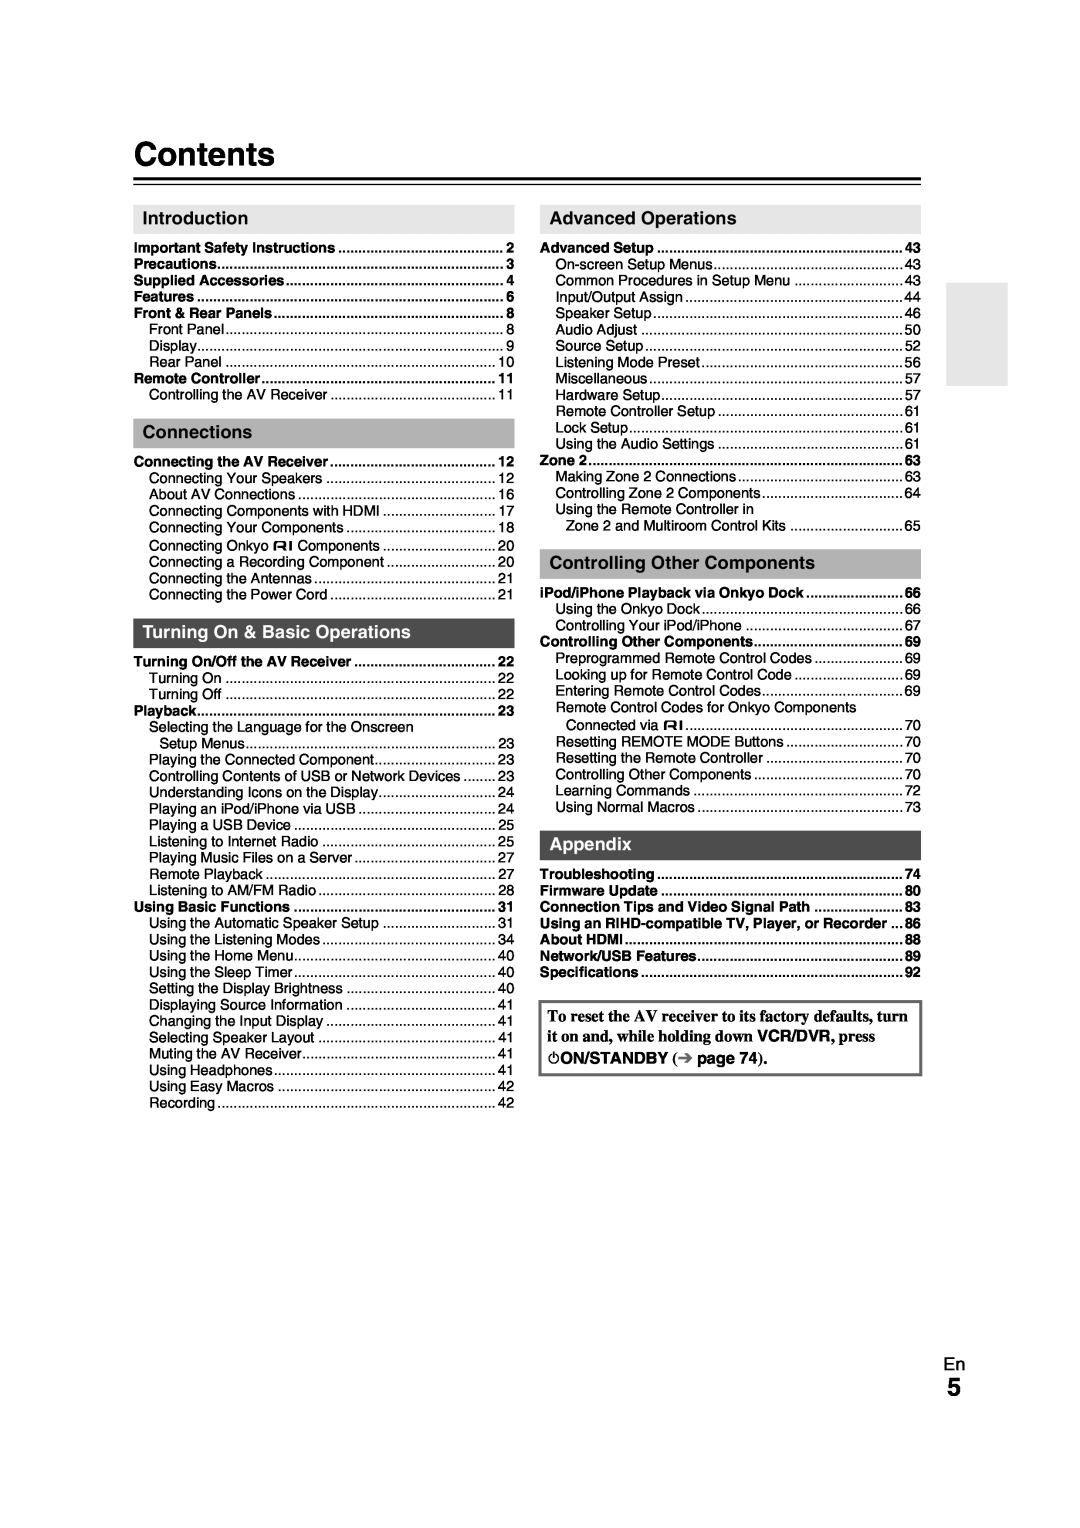 Onkyo TX-NR709 instruction manual Contents, Turning On & Basic Operations, Appendix, 8ON/STANDBY page 